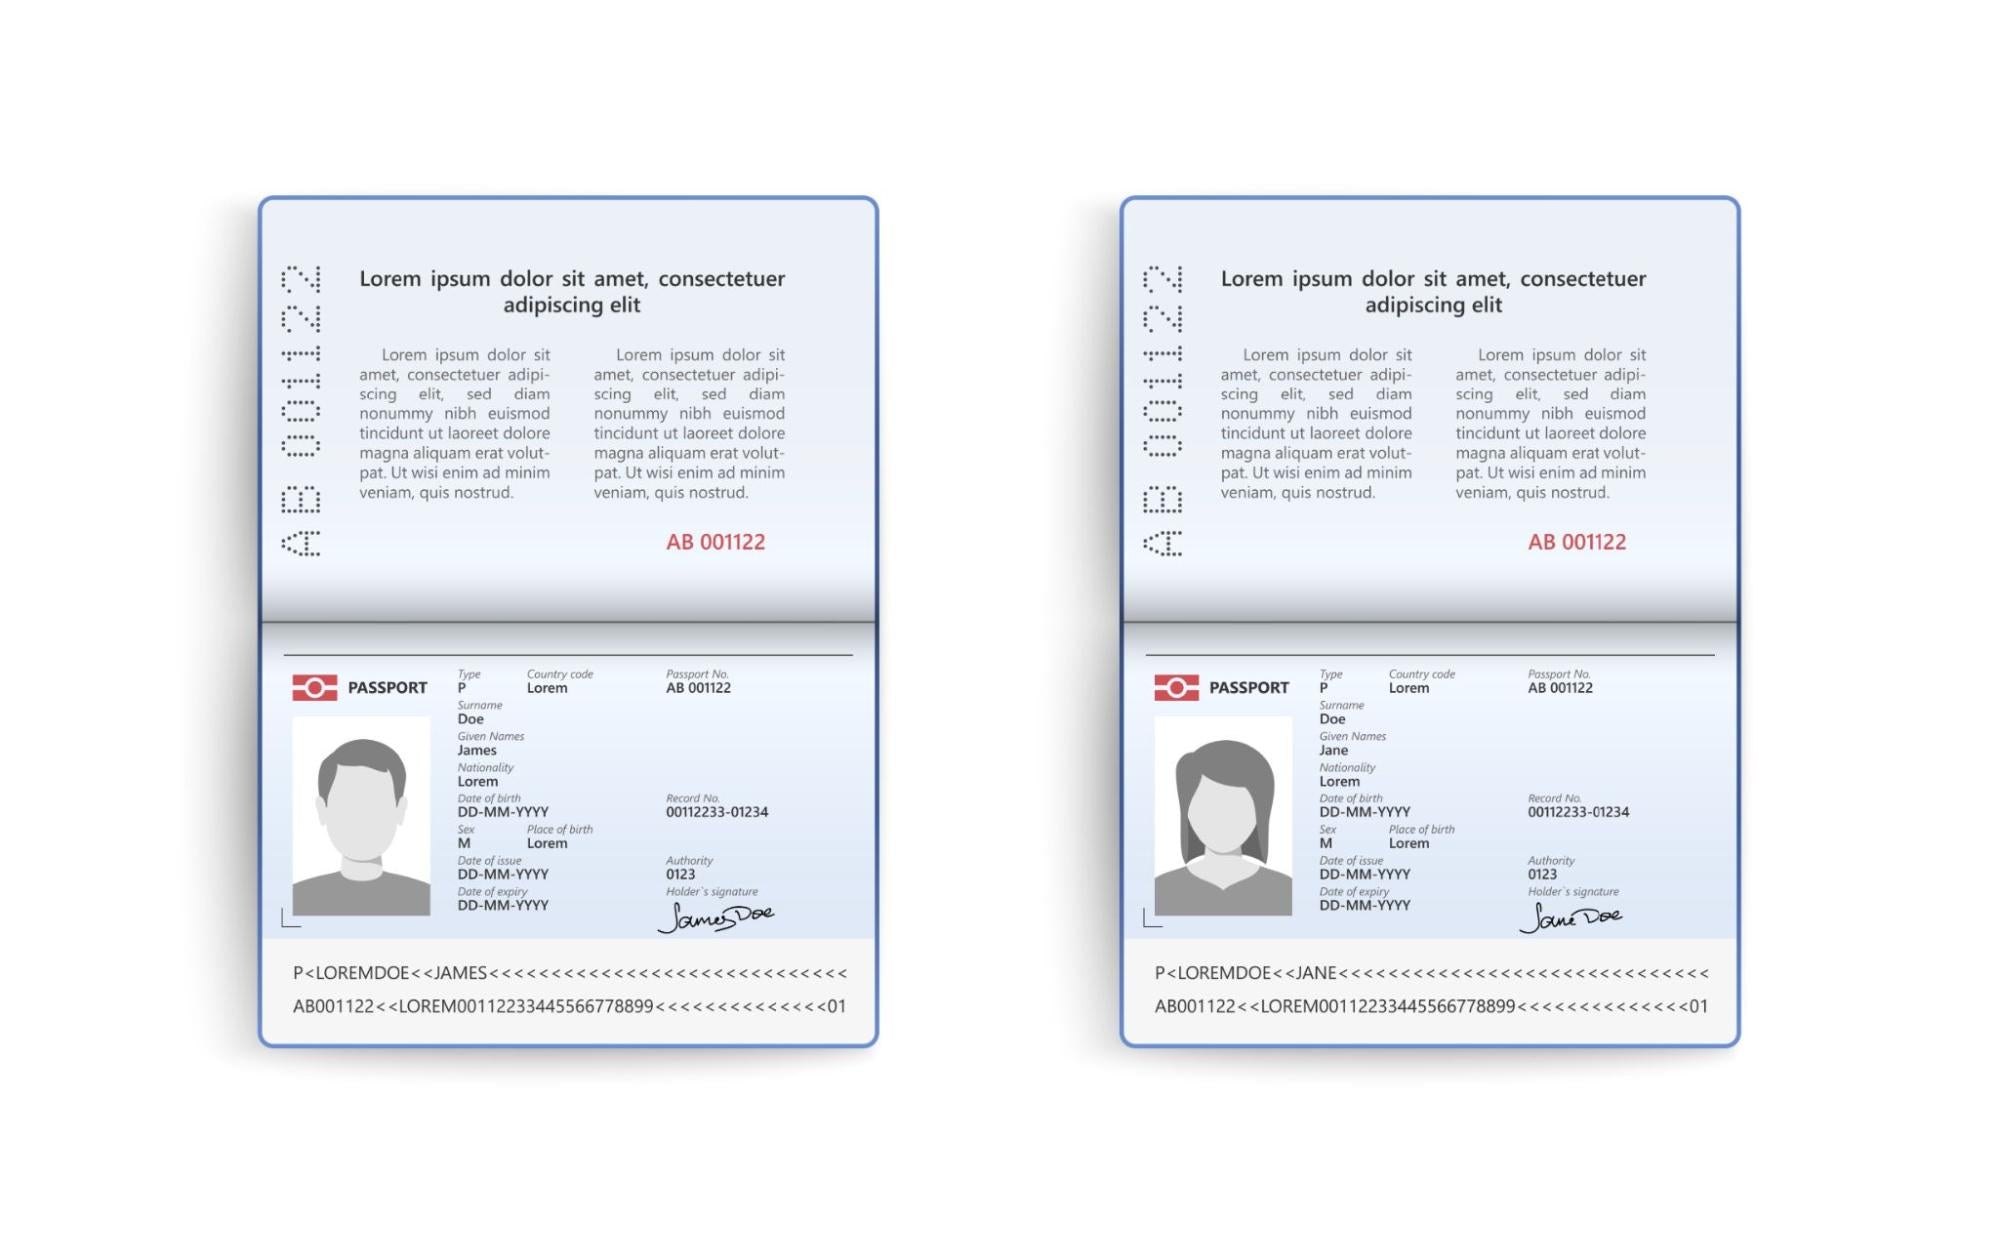 Difference Between Passport Book And Card - CabinZero